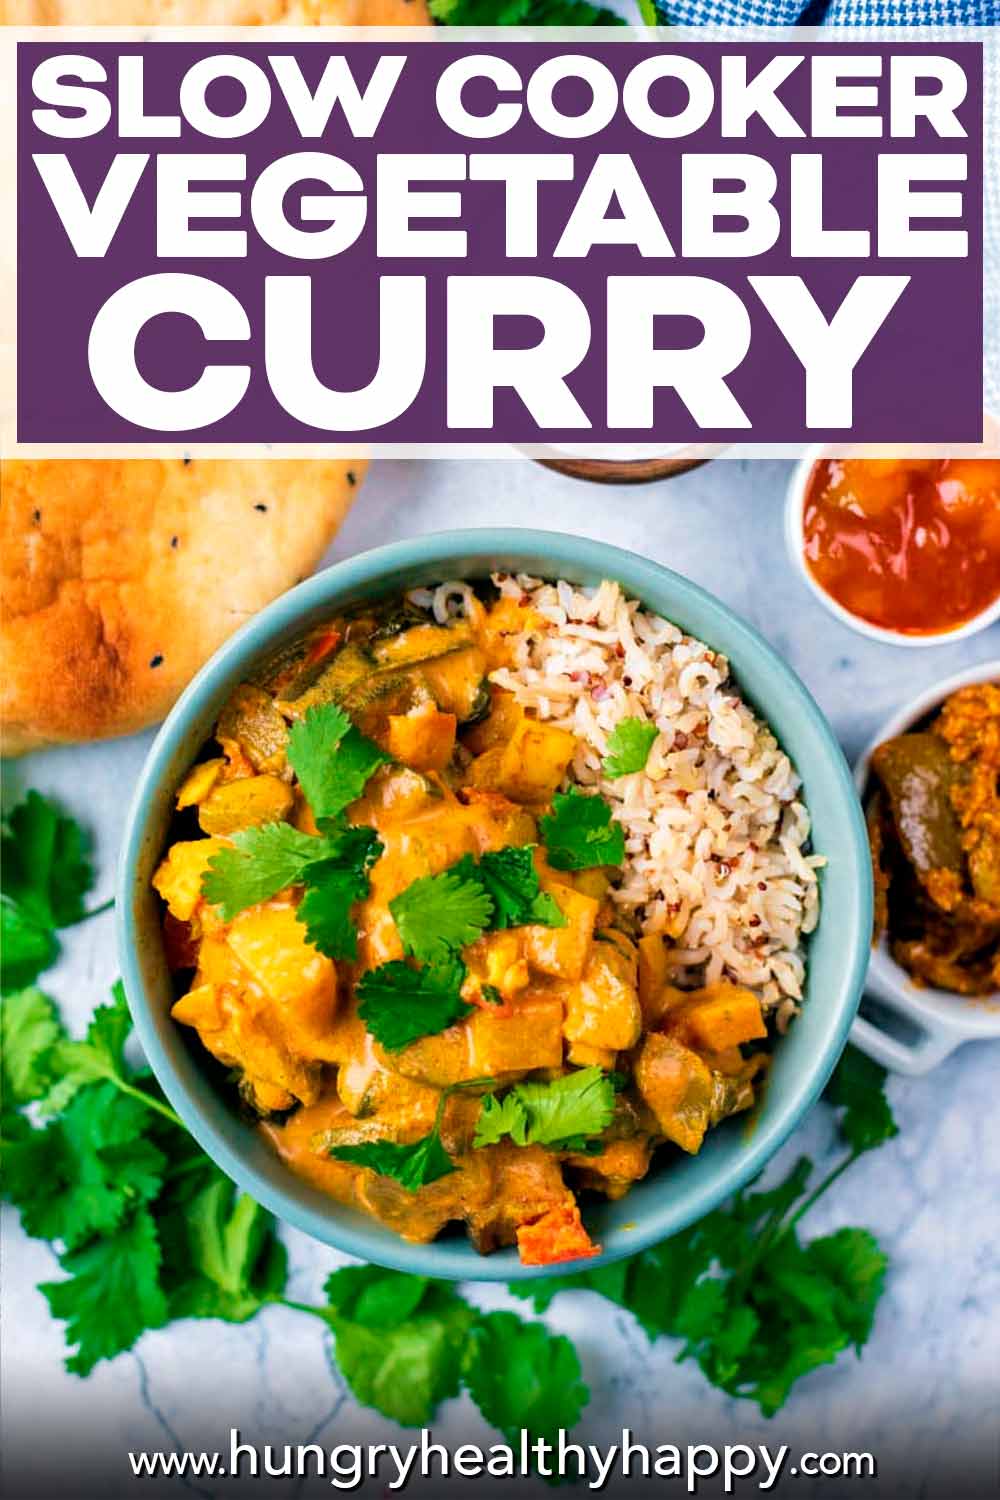 Slow Cooker Vegetable Curry - Hungry Healthy Happy